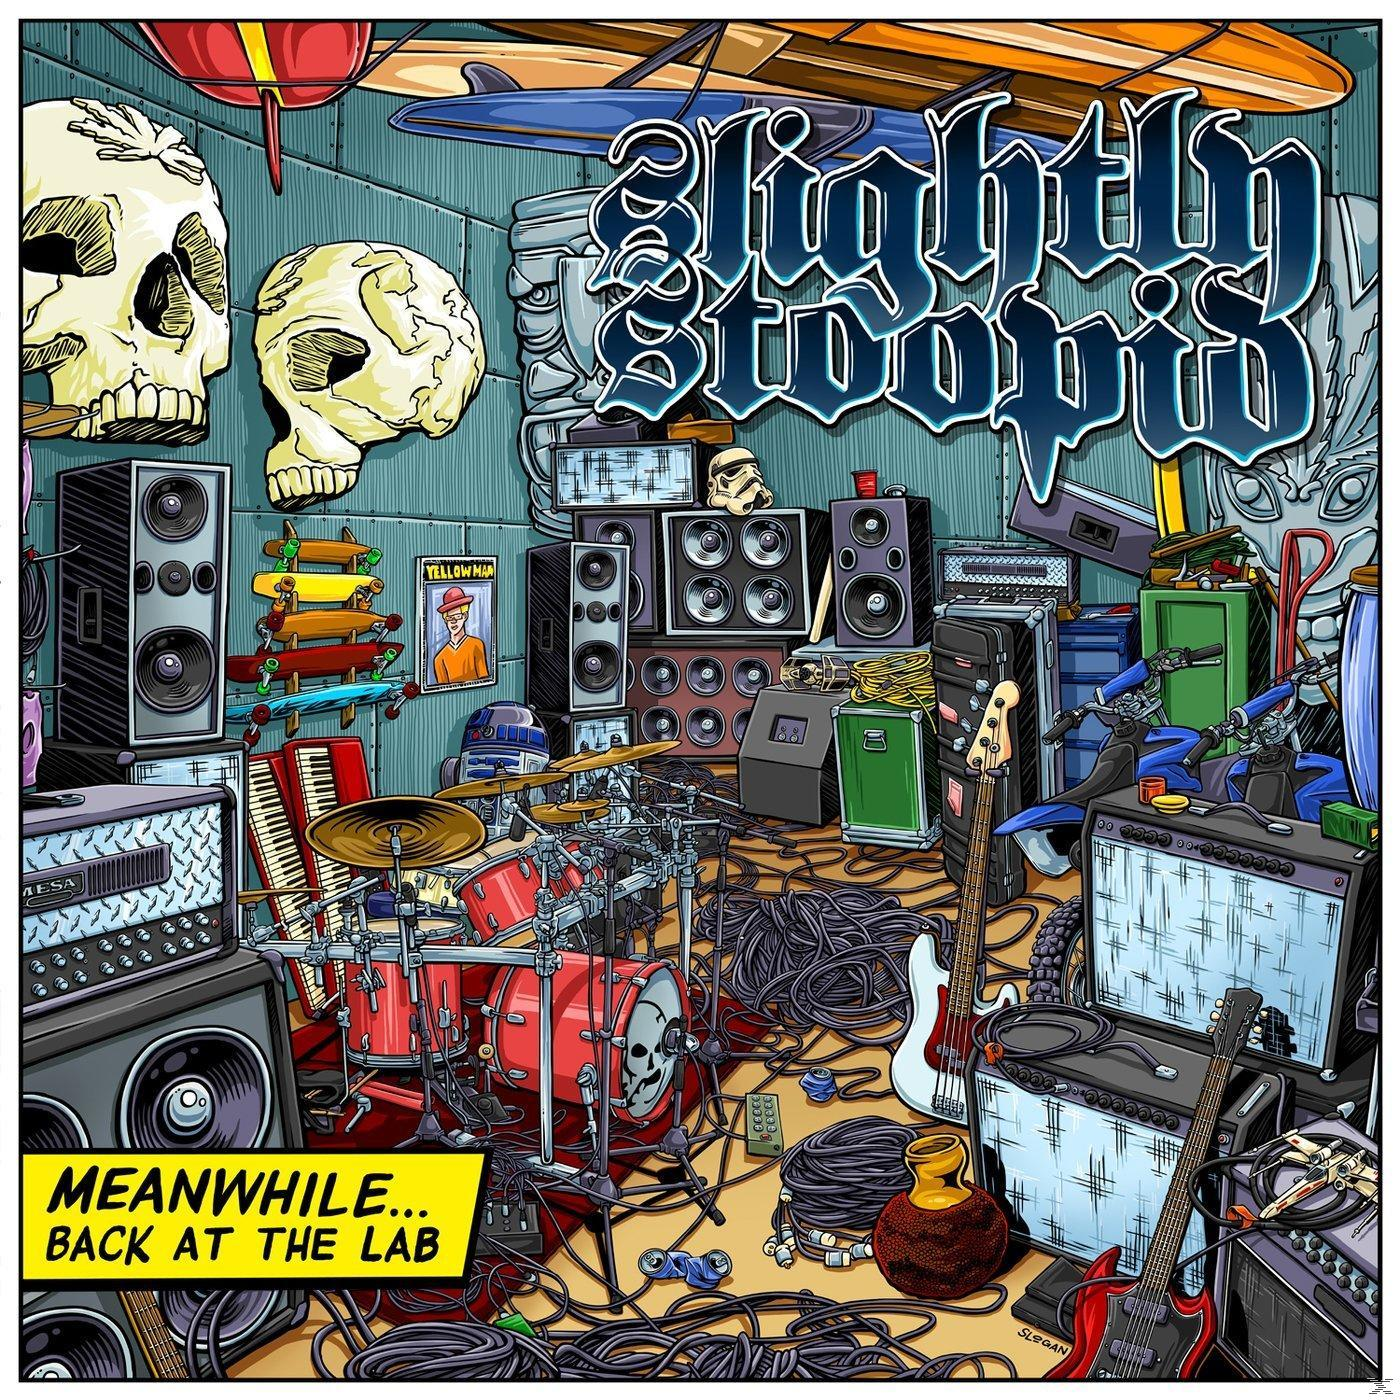 Lab (CD) At Slightly Stoopid Meanwhile...Back The - -